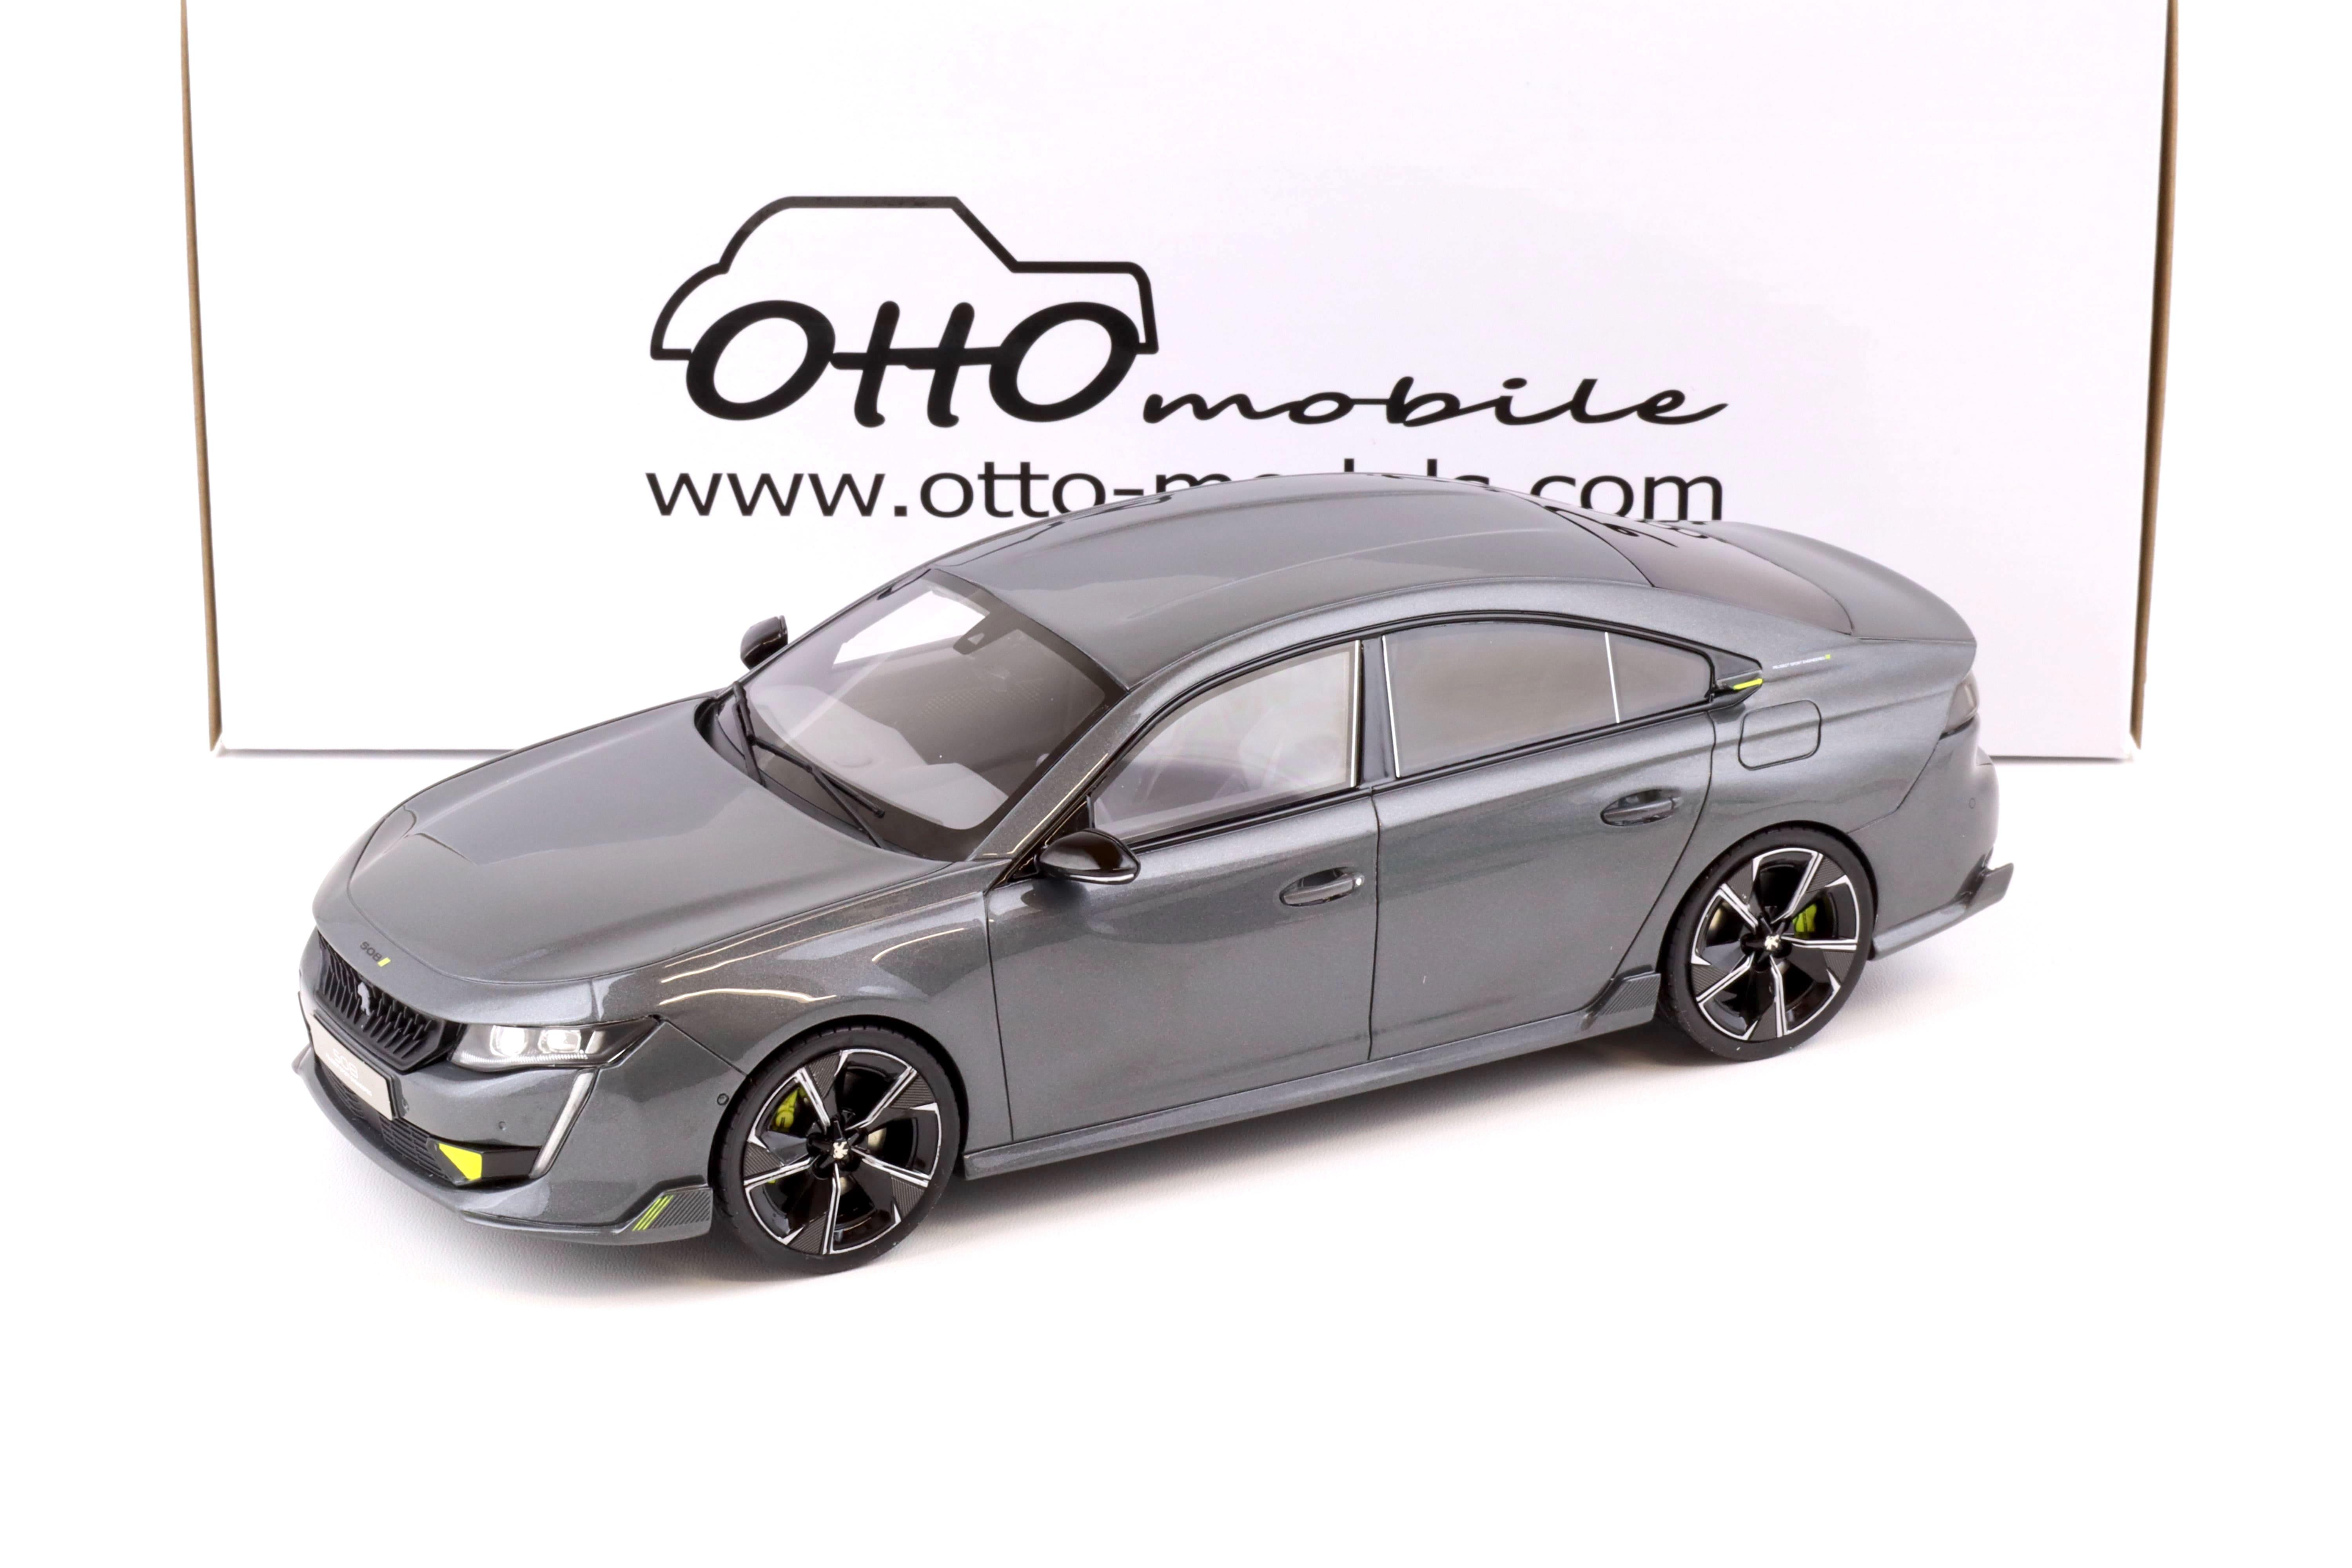 1:18 OTTO mobile OT394 Peugeot 508 Sport Engineered Concept grey 2020